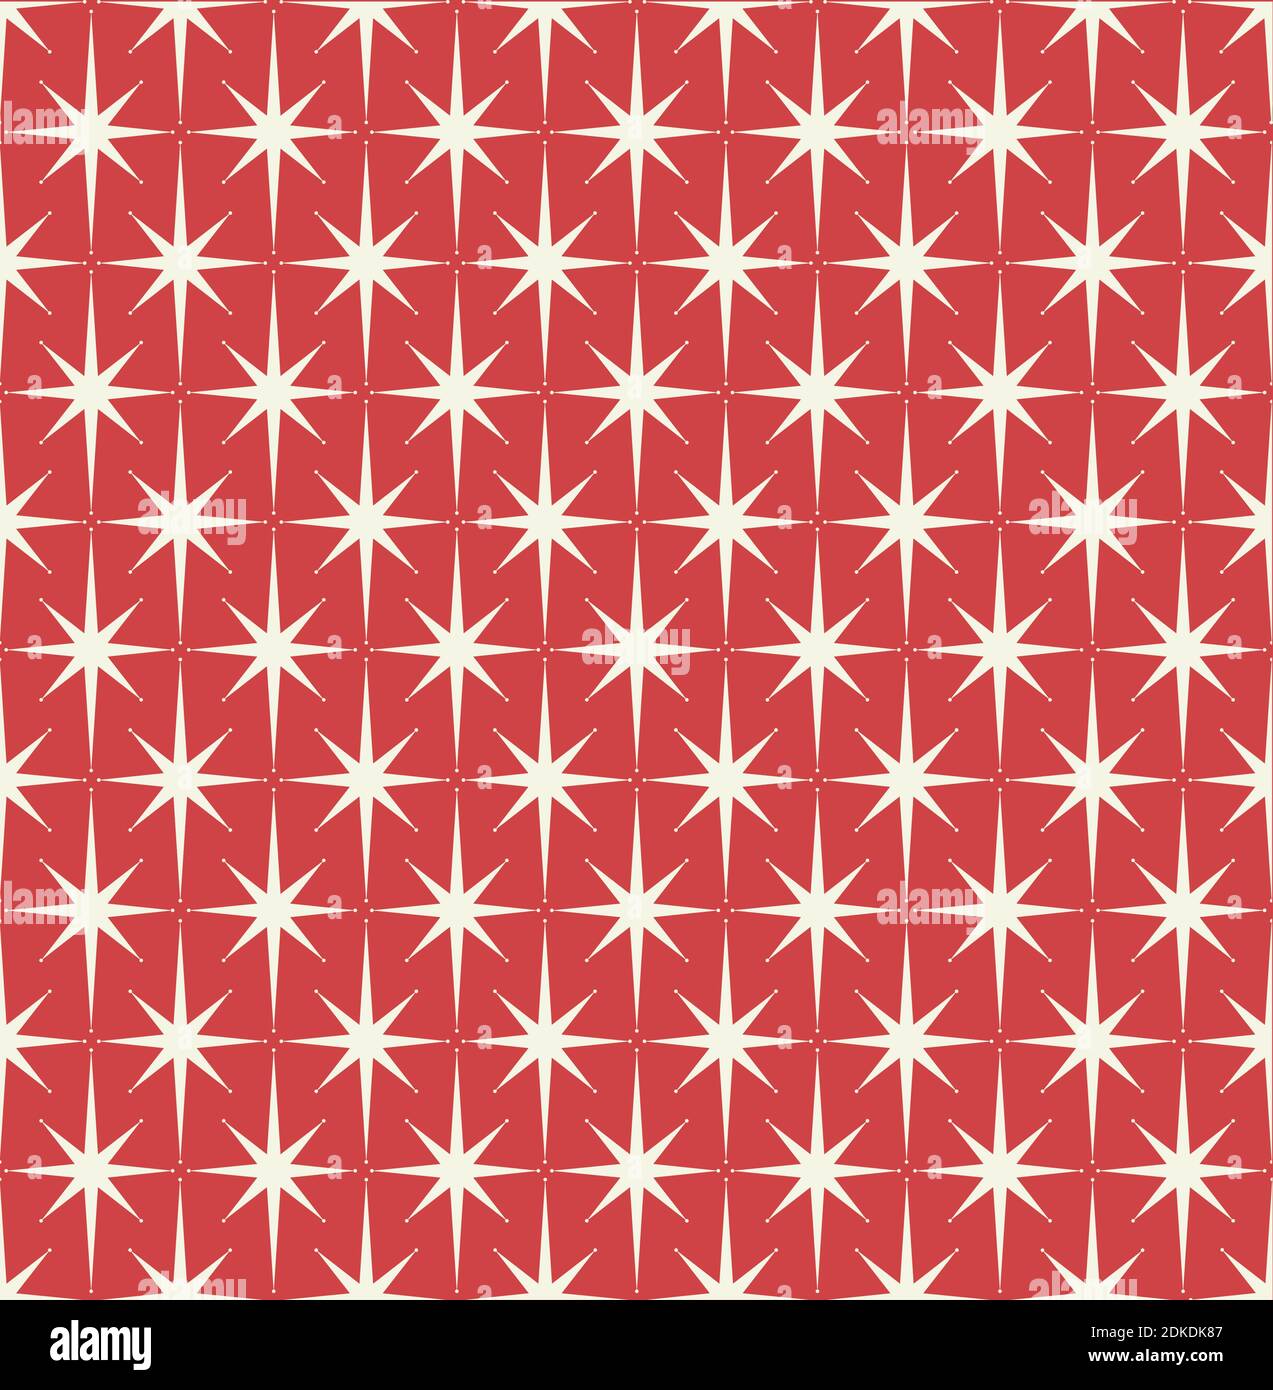 Mid-century modern wrapping paper starburst pattern on red.  Inspired by Atomic era. Repeatable and seamless. Stock Vector